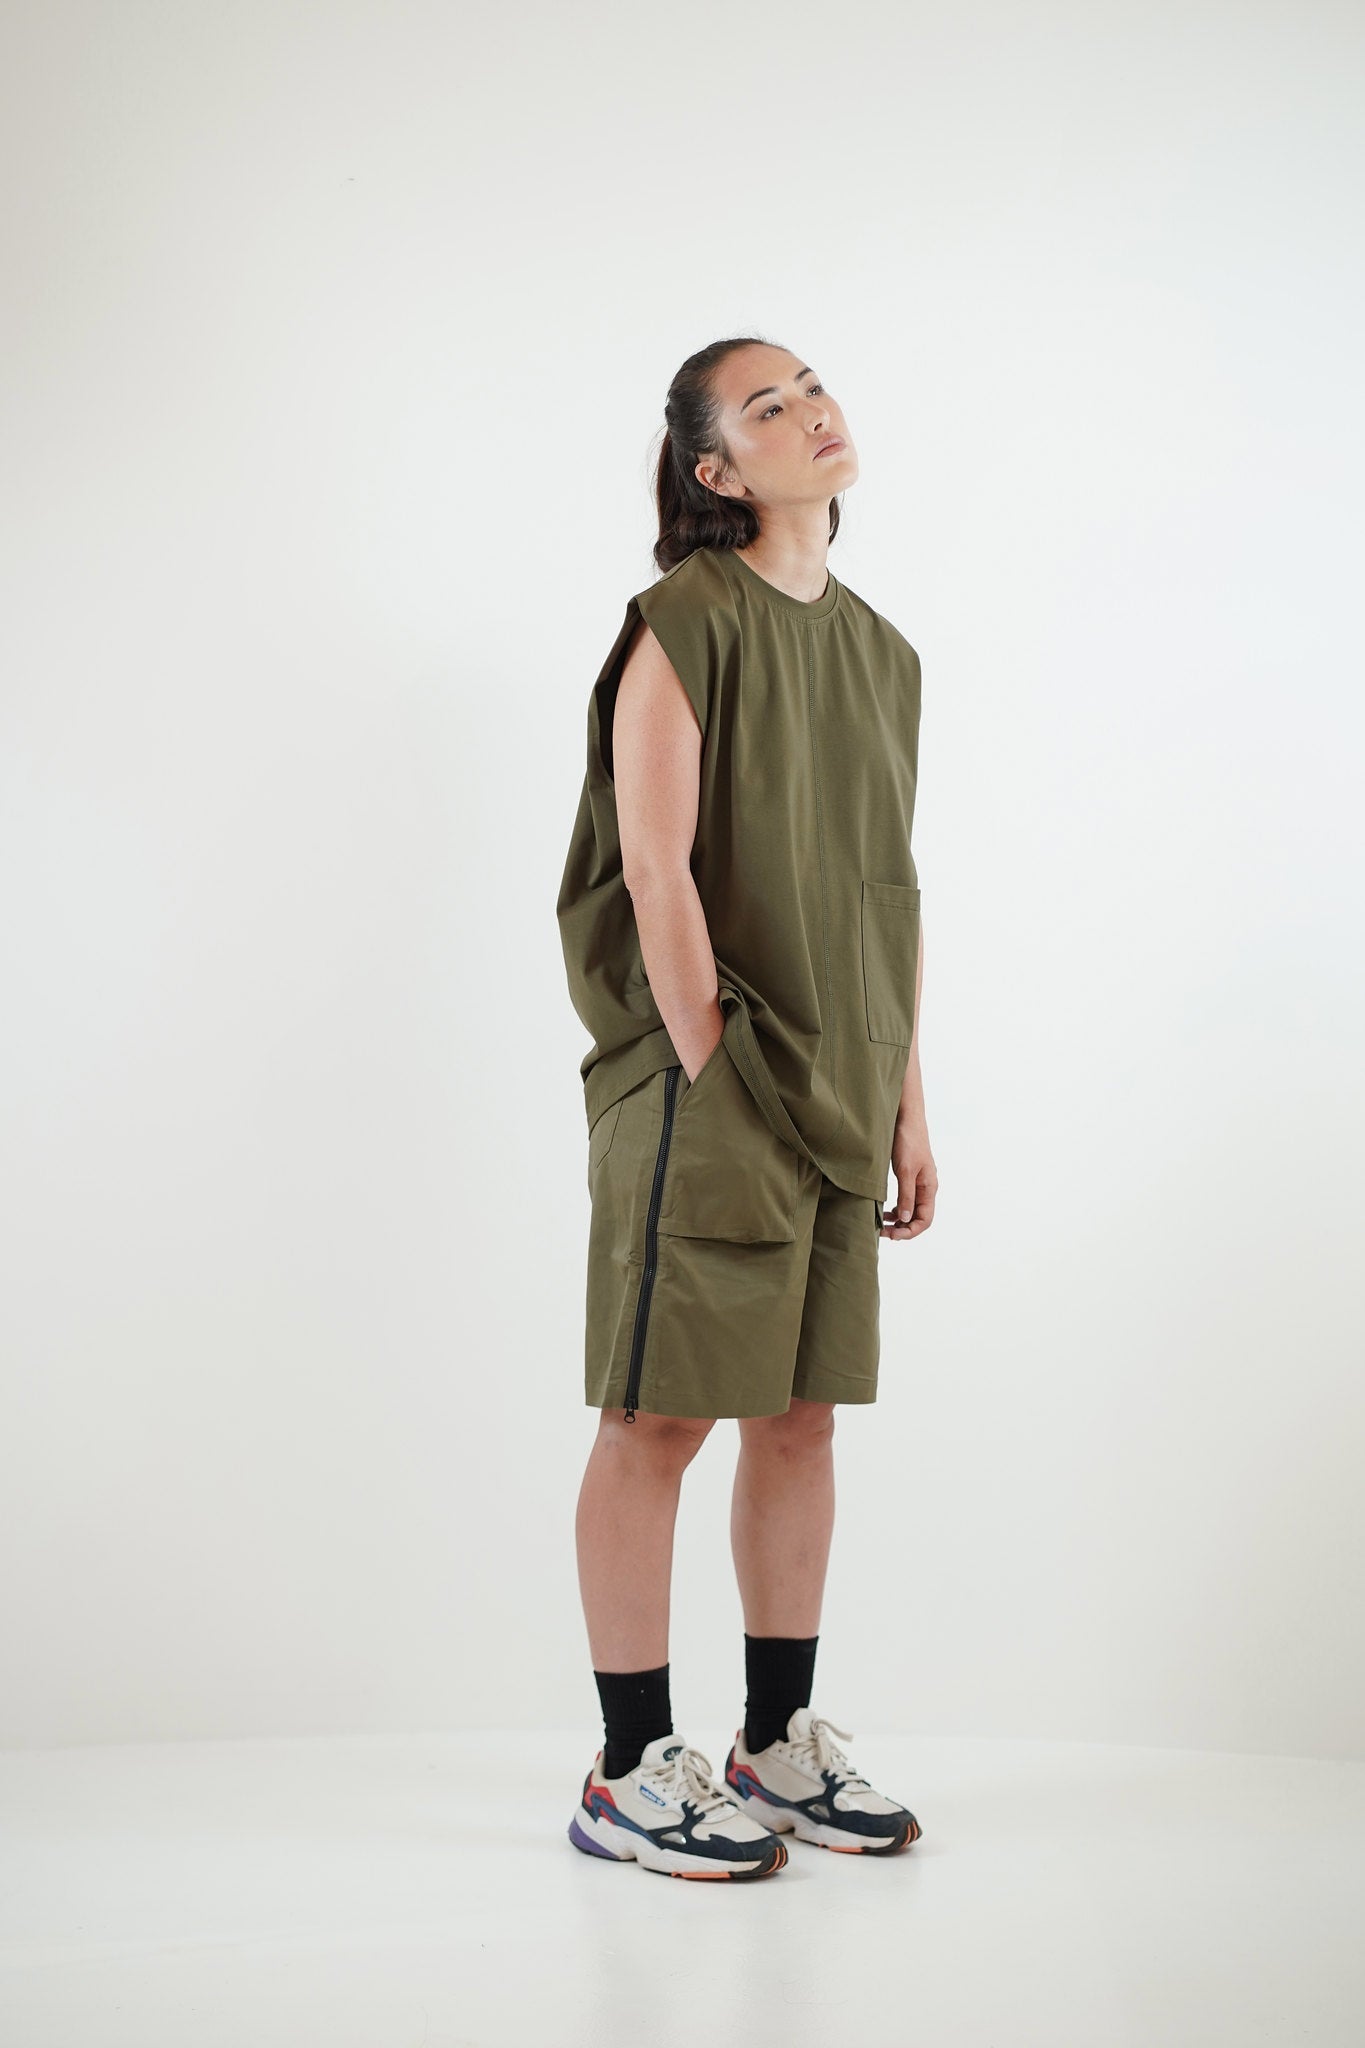 Sleeveless Tee - Olive Green - G R A Y E